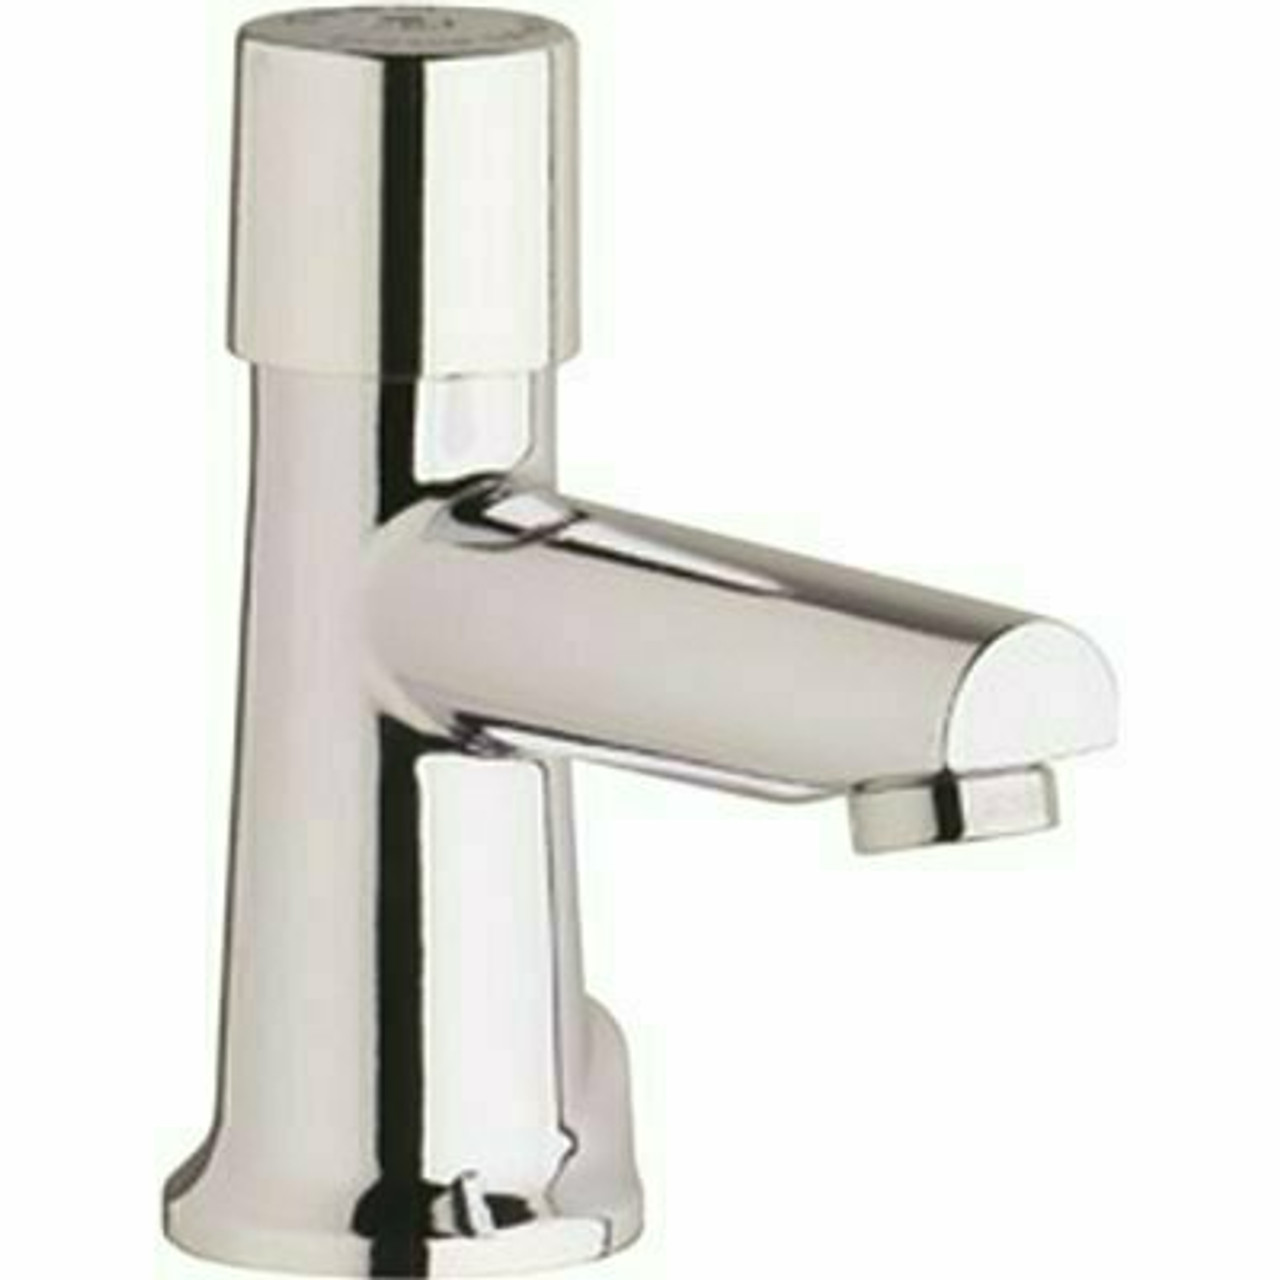 Chicago Faucets Single Handle Deck-Mounted Hot/Cold Metering Mixing Faucet With Mvp Cartridge 4 In. 0.5 Gpm Chrome-Plated